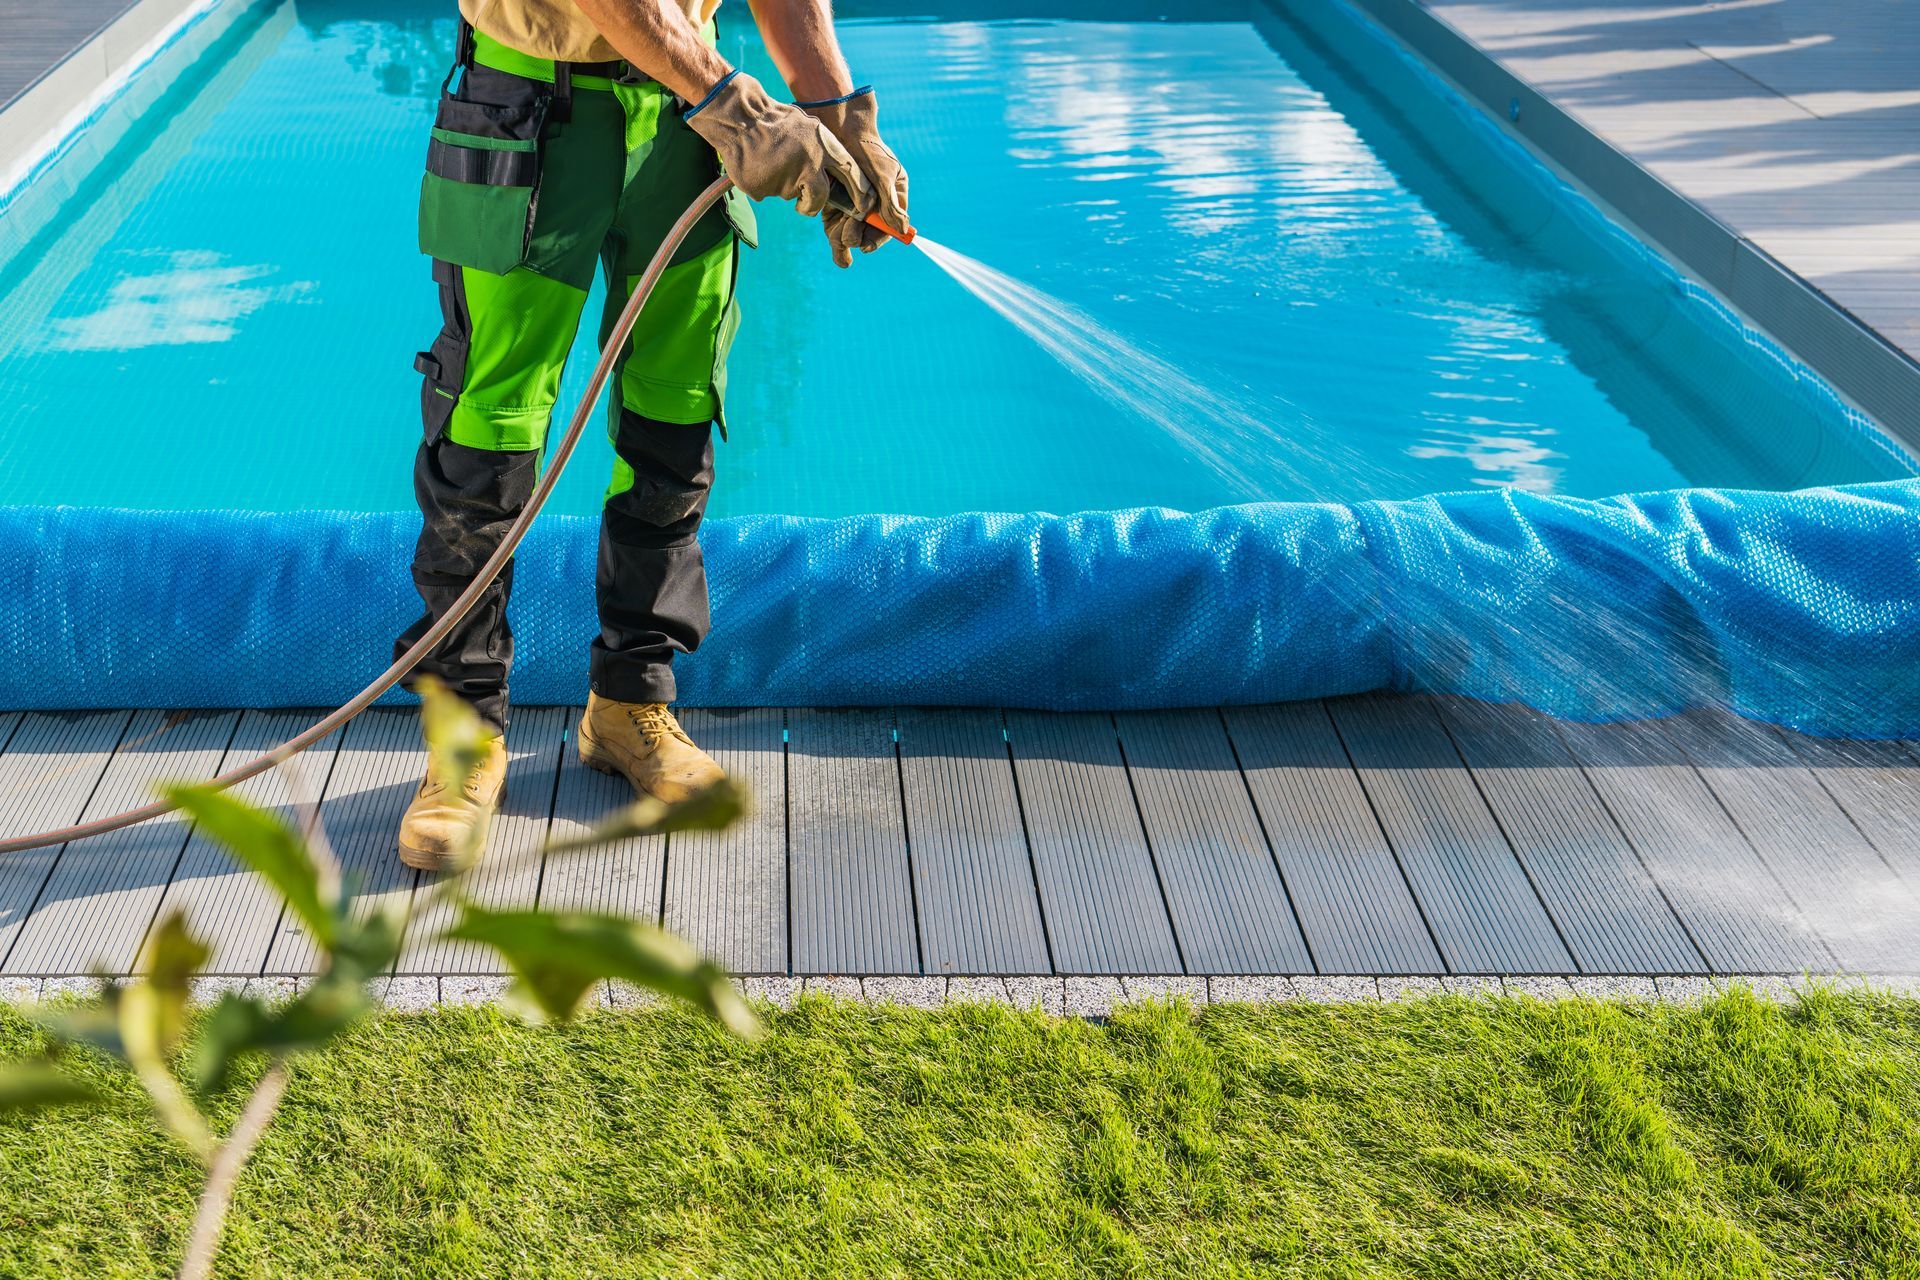 a man is spraying a pool with a hose